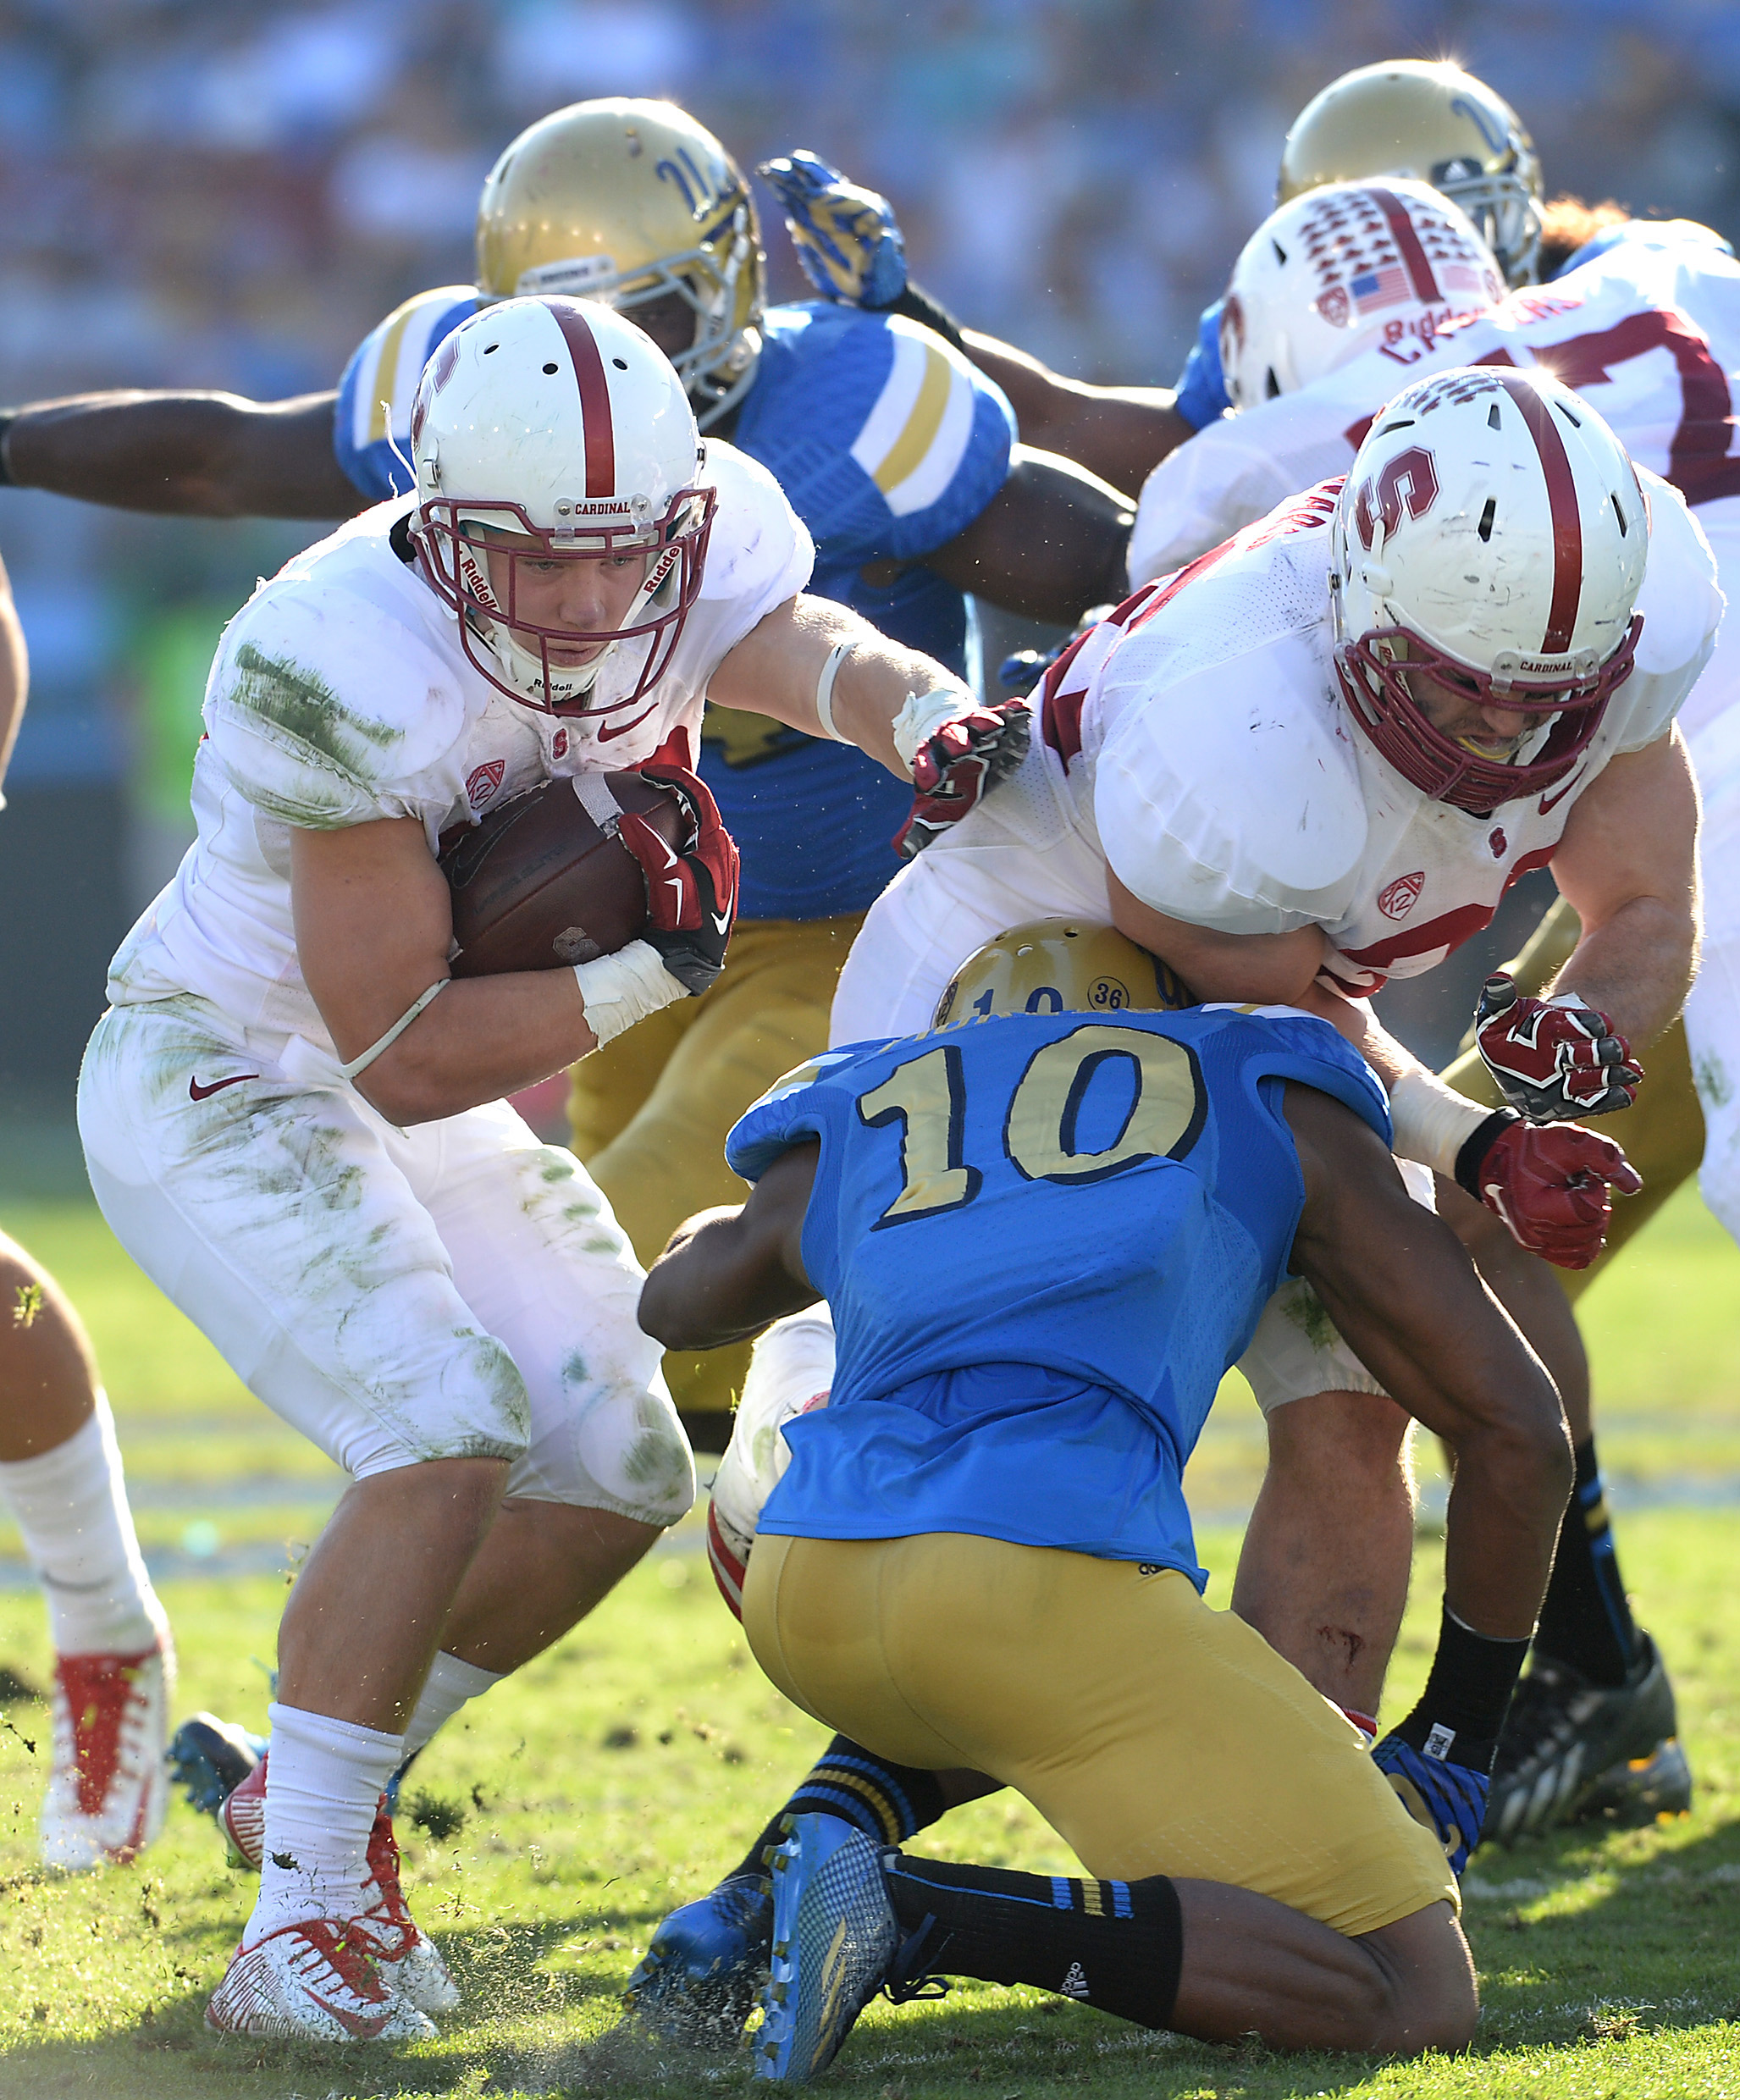 Will the Bruins be able to stand up to Stanford this year?